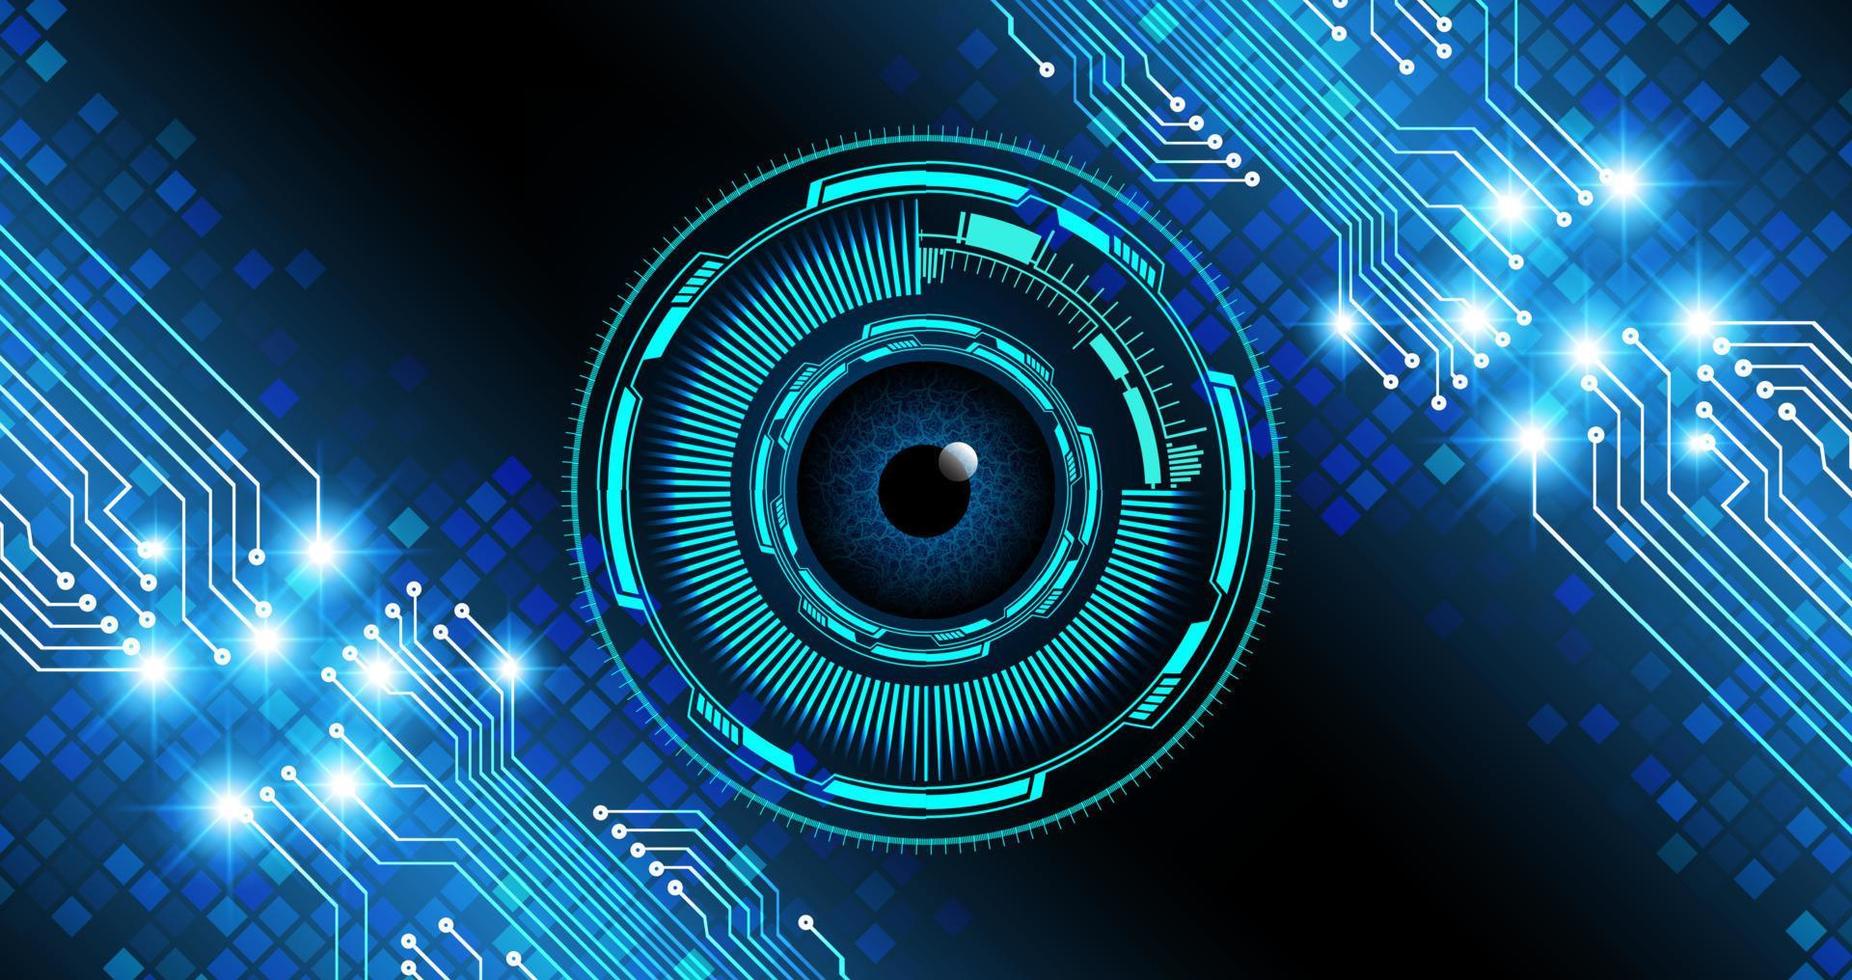 Blue eye cyber circuit future technology concept background vector